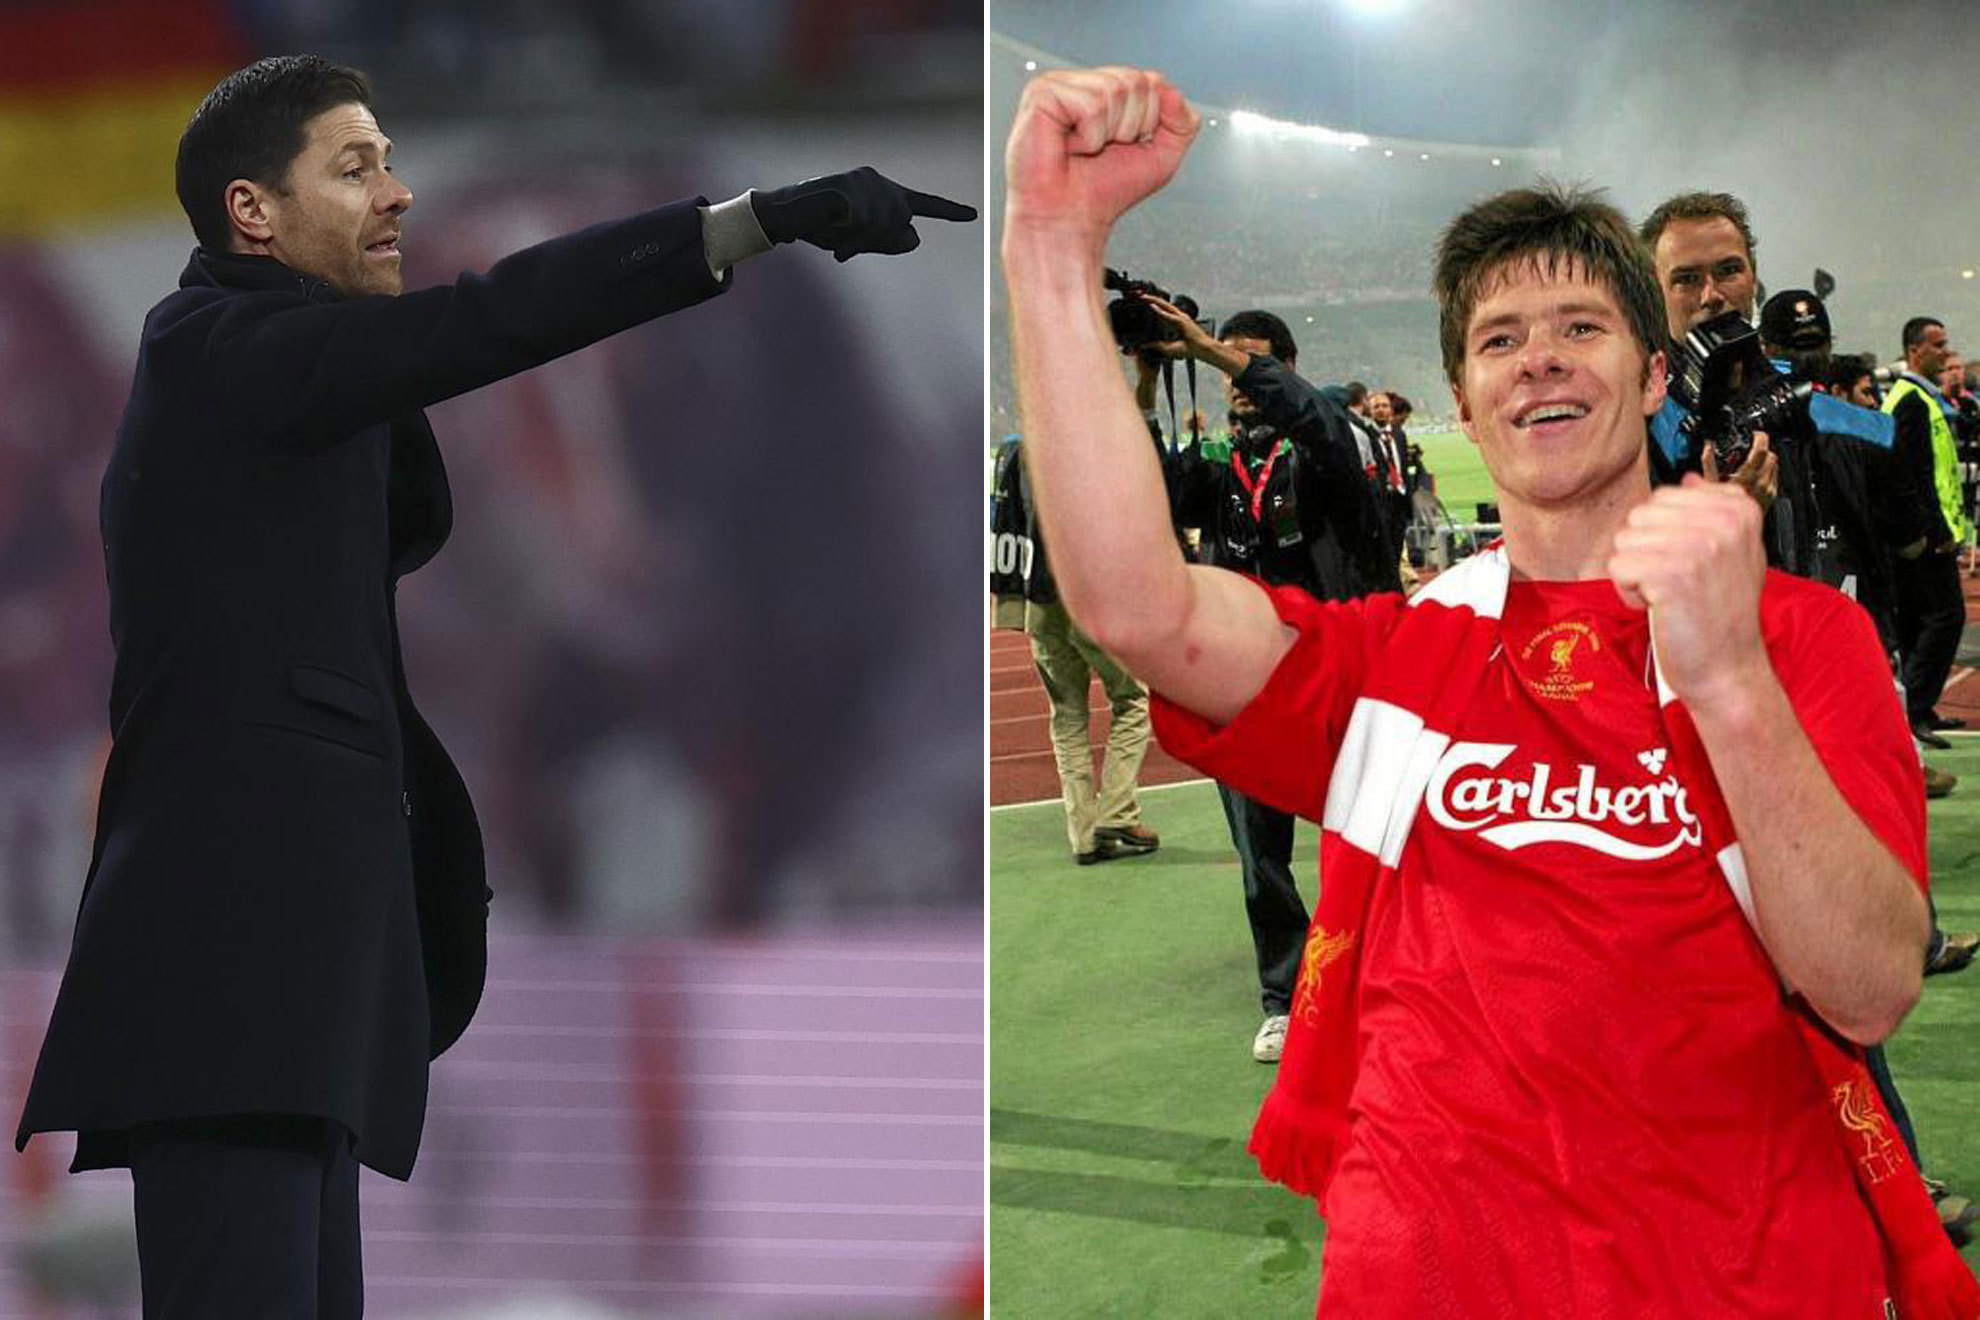 Liverpool are pining for Xabi Alonso after Klopps departure